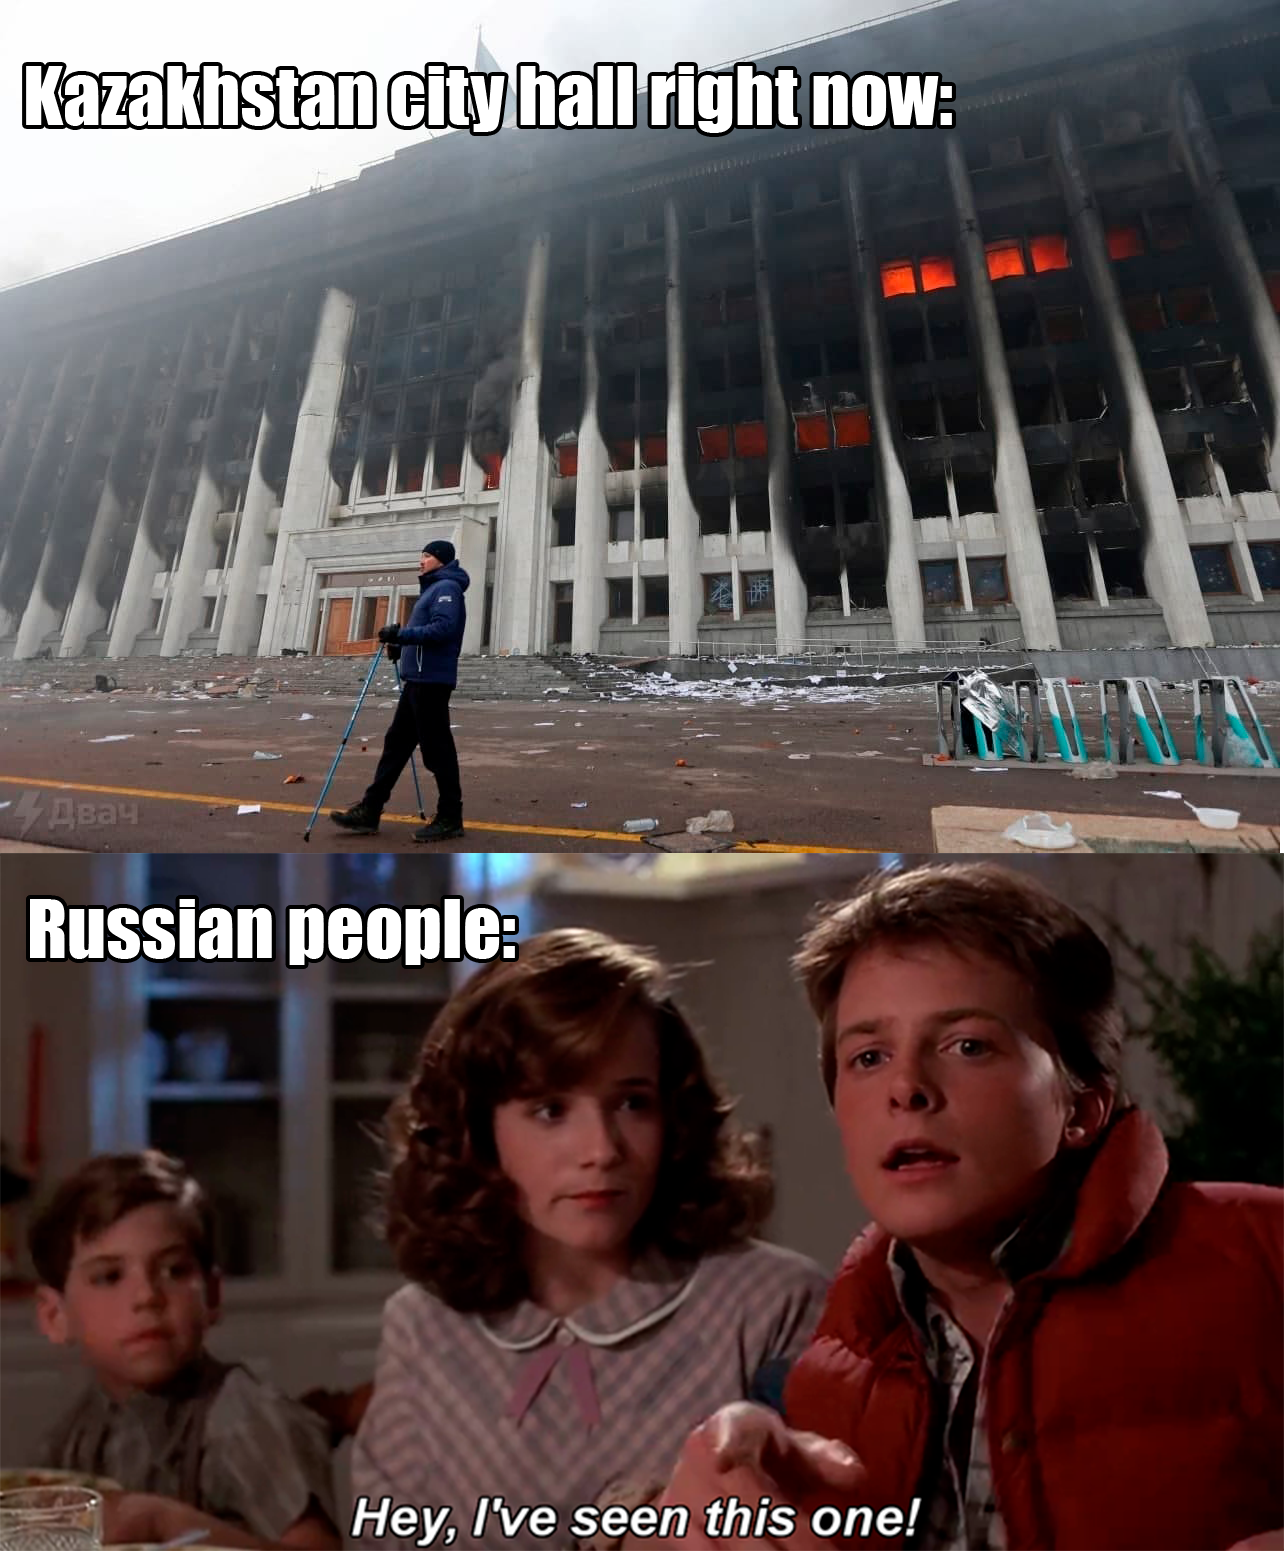 zemeckis back to the future - Kazakhstan city hall right now Russian people Hey, I've seen this one!